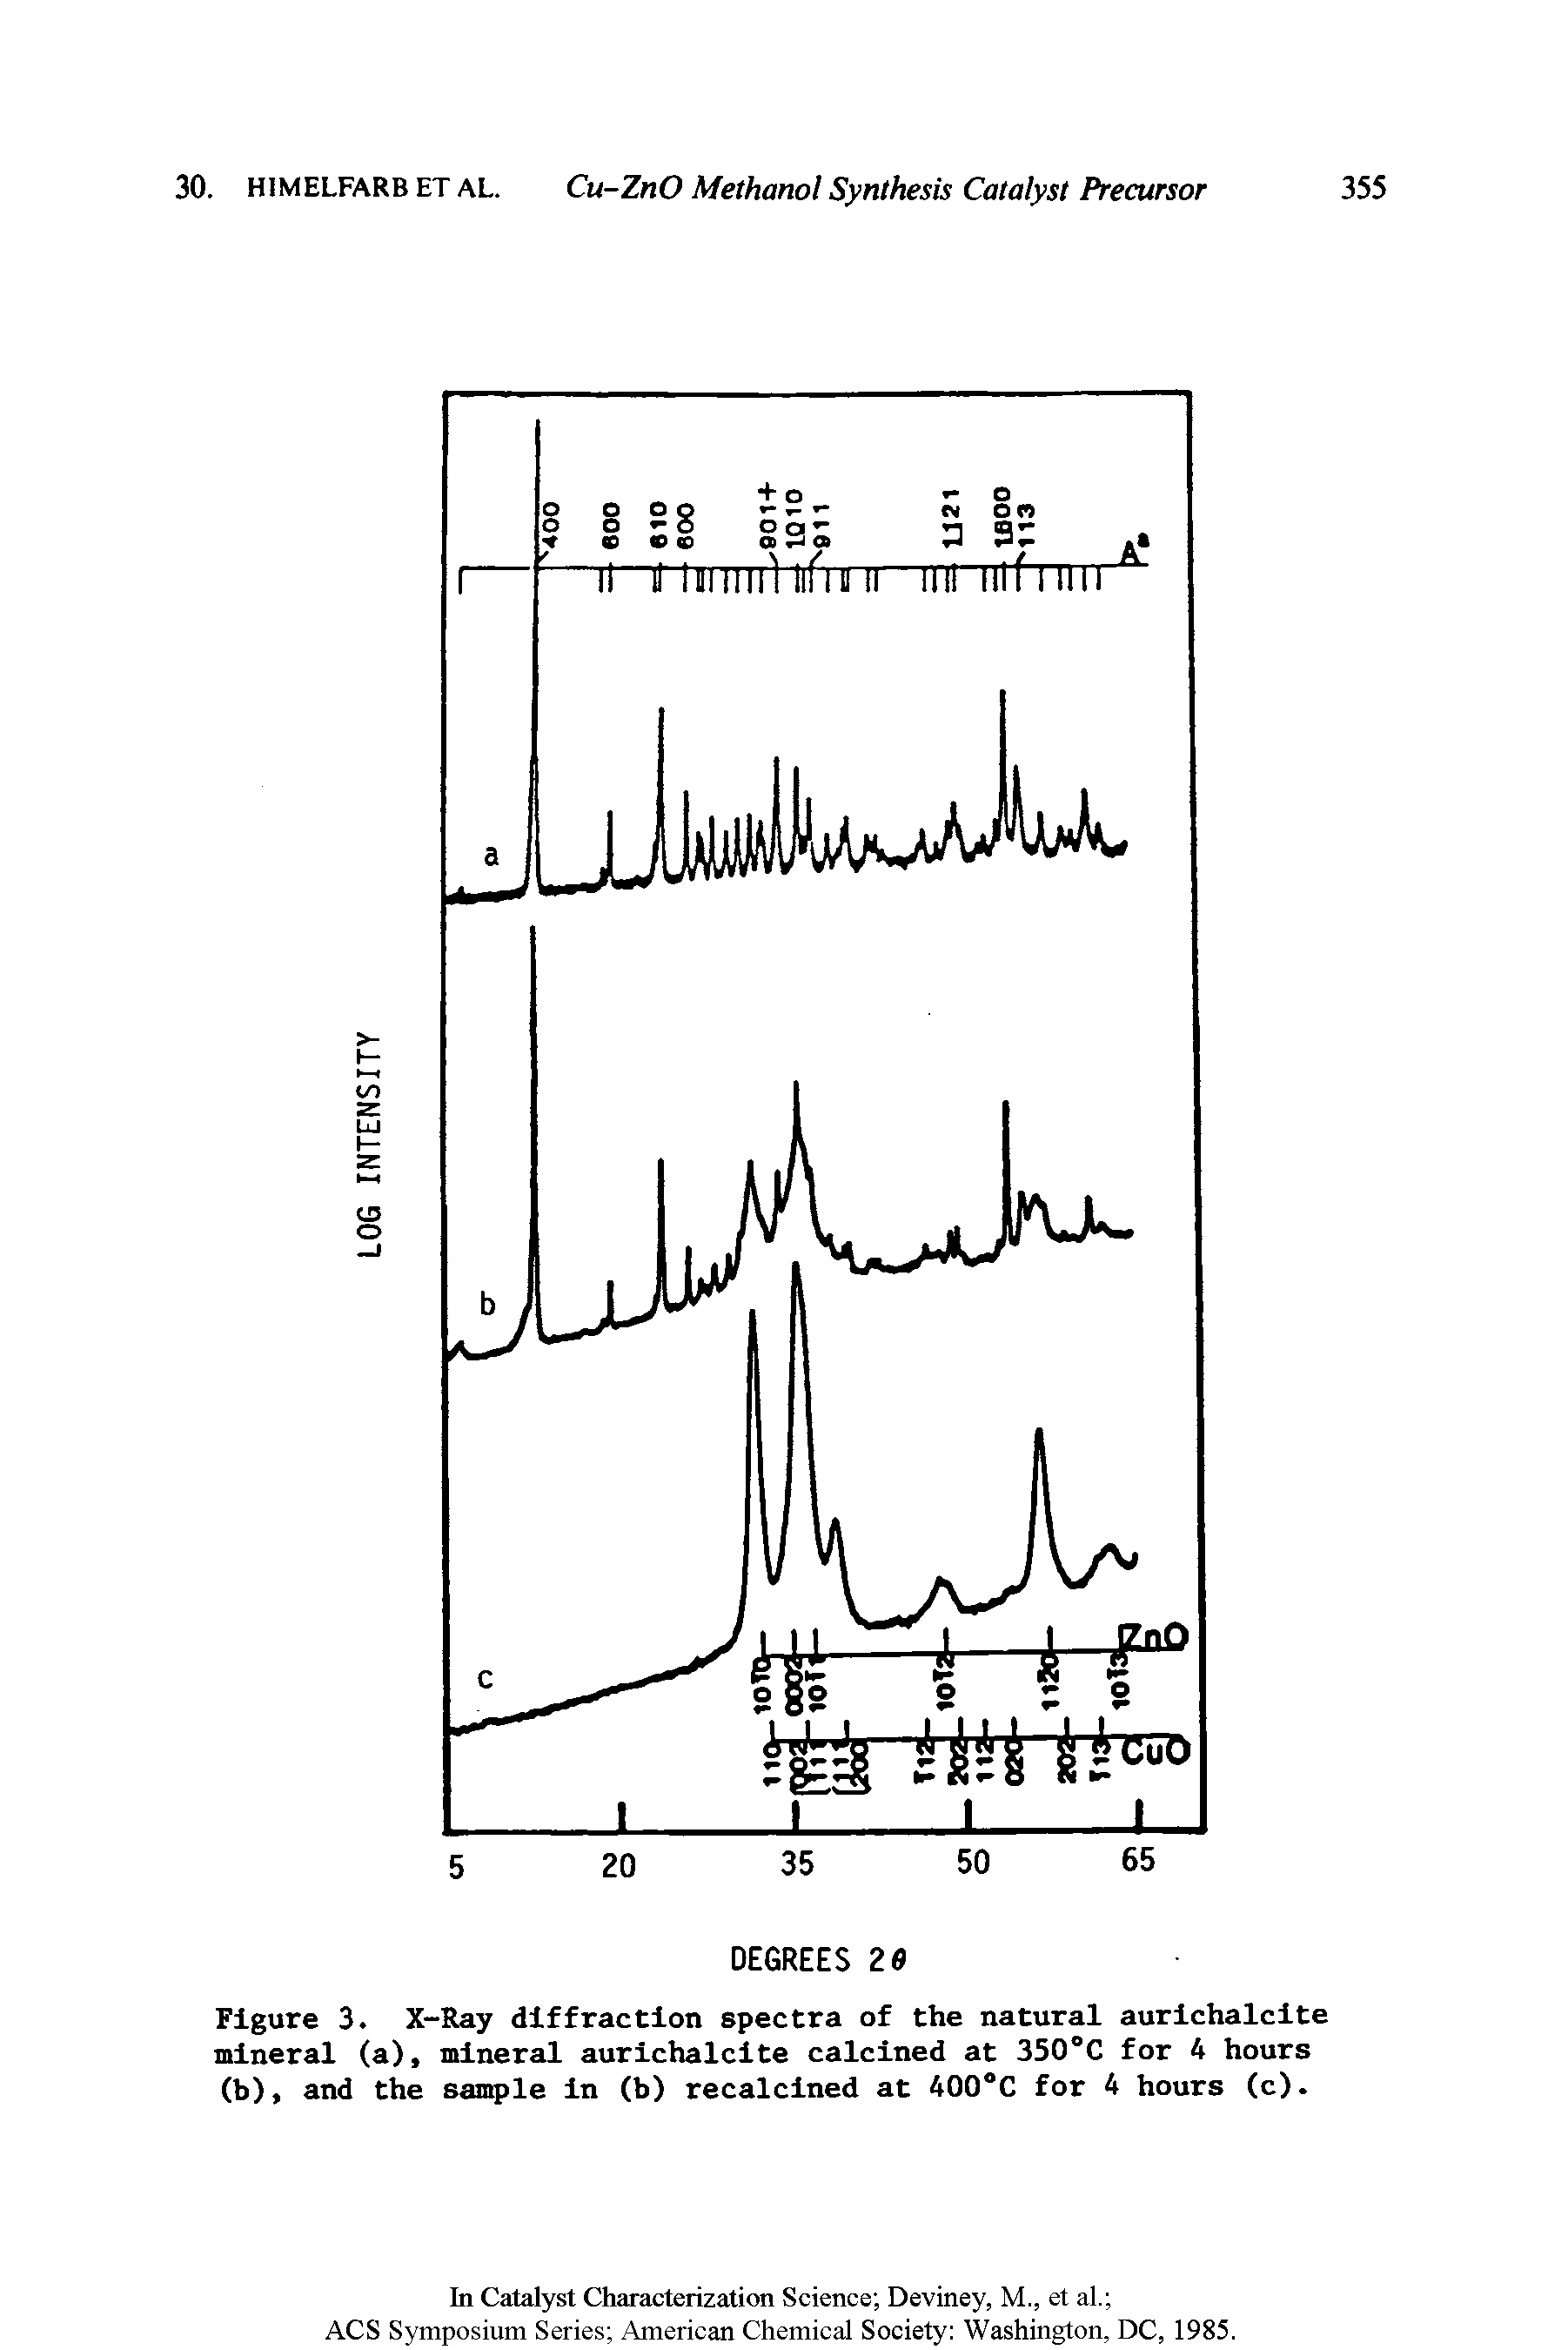 Figure 3. X-Ray diffraction spectra of the natural aurichalcite mineral (a), mineral aurichalcite calcined at 350°C for 4 hours (b), and the sample in (b) recalcined at 400 C for 4 hours (c).